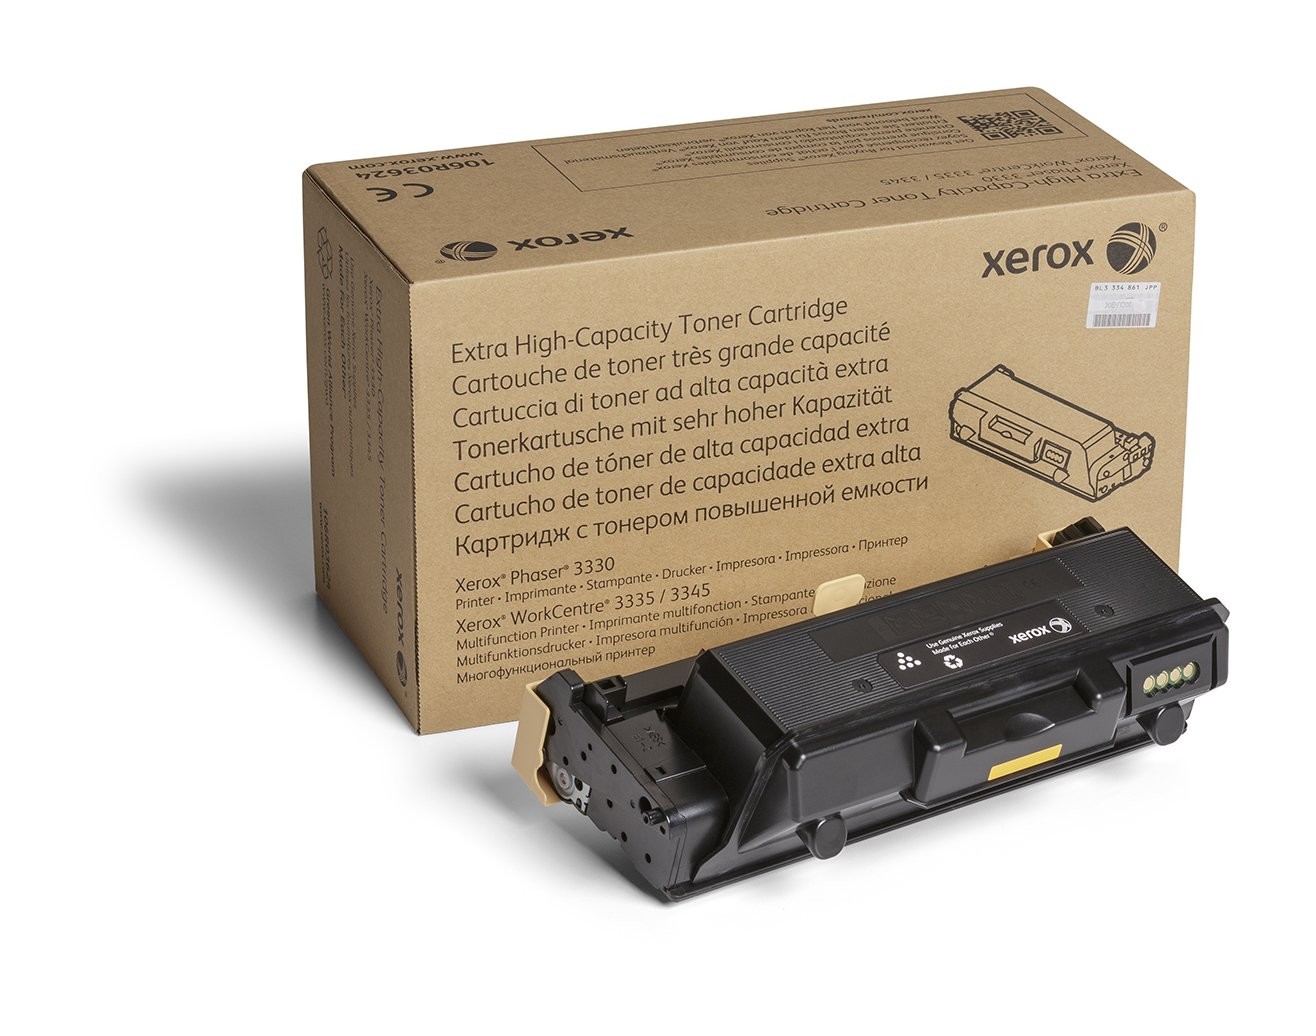 Xerox Genuine 106R03624 Extra High-Capacity Toner Cartridge For Phaser 3330 WC 3335/3345 106R03624